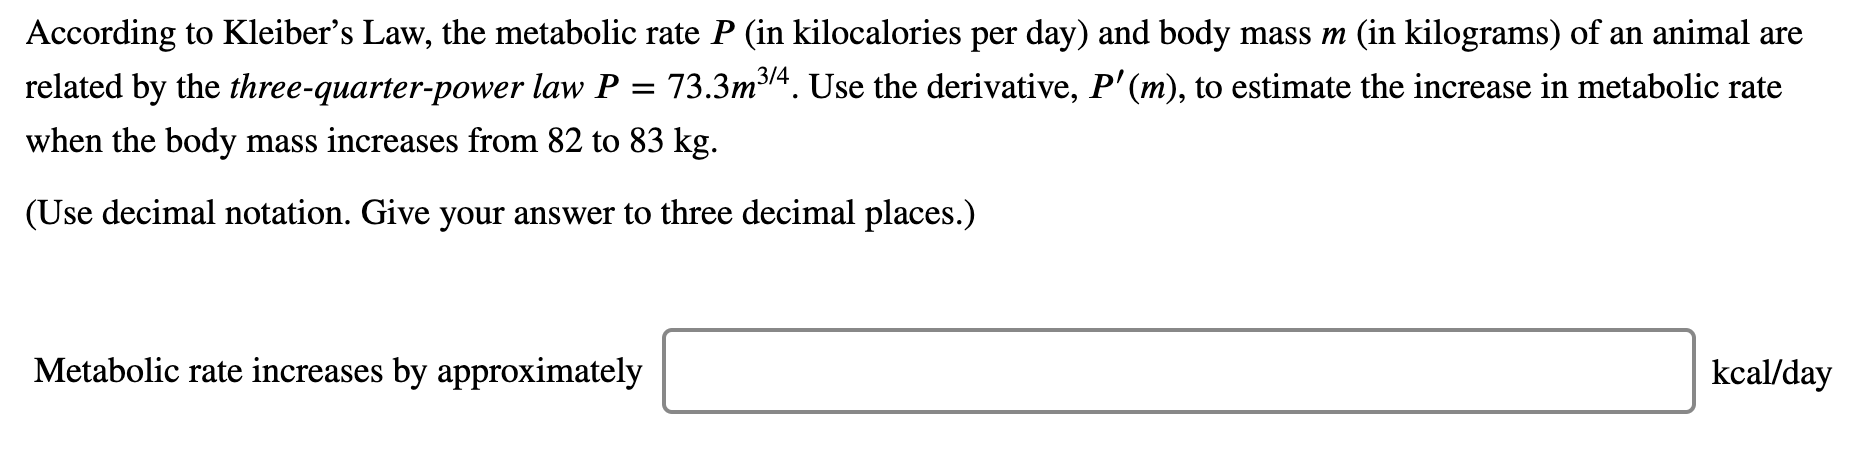 According to Kleiber's Law, the metabolic rate P (in kilocalories per day) and body mass m (in kilograms) of an animal are
related by the three-quarter-power law P
3/4
73.3m314. Use the derivative, P'(m), to estimate the increase in metabolic rate
when the body mass increases from 82 to 83 kg.
(Use decimal notation. Give your answer to three decimal places.)
Metabolic rate increases by approximately
kcal/day
